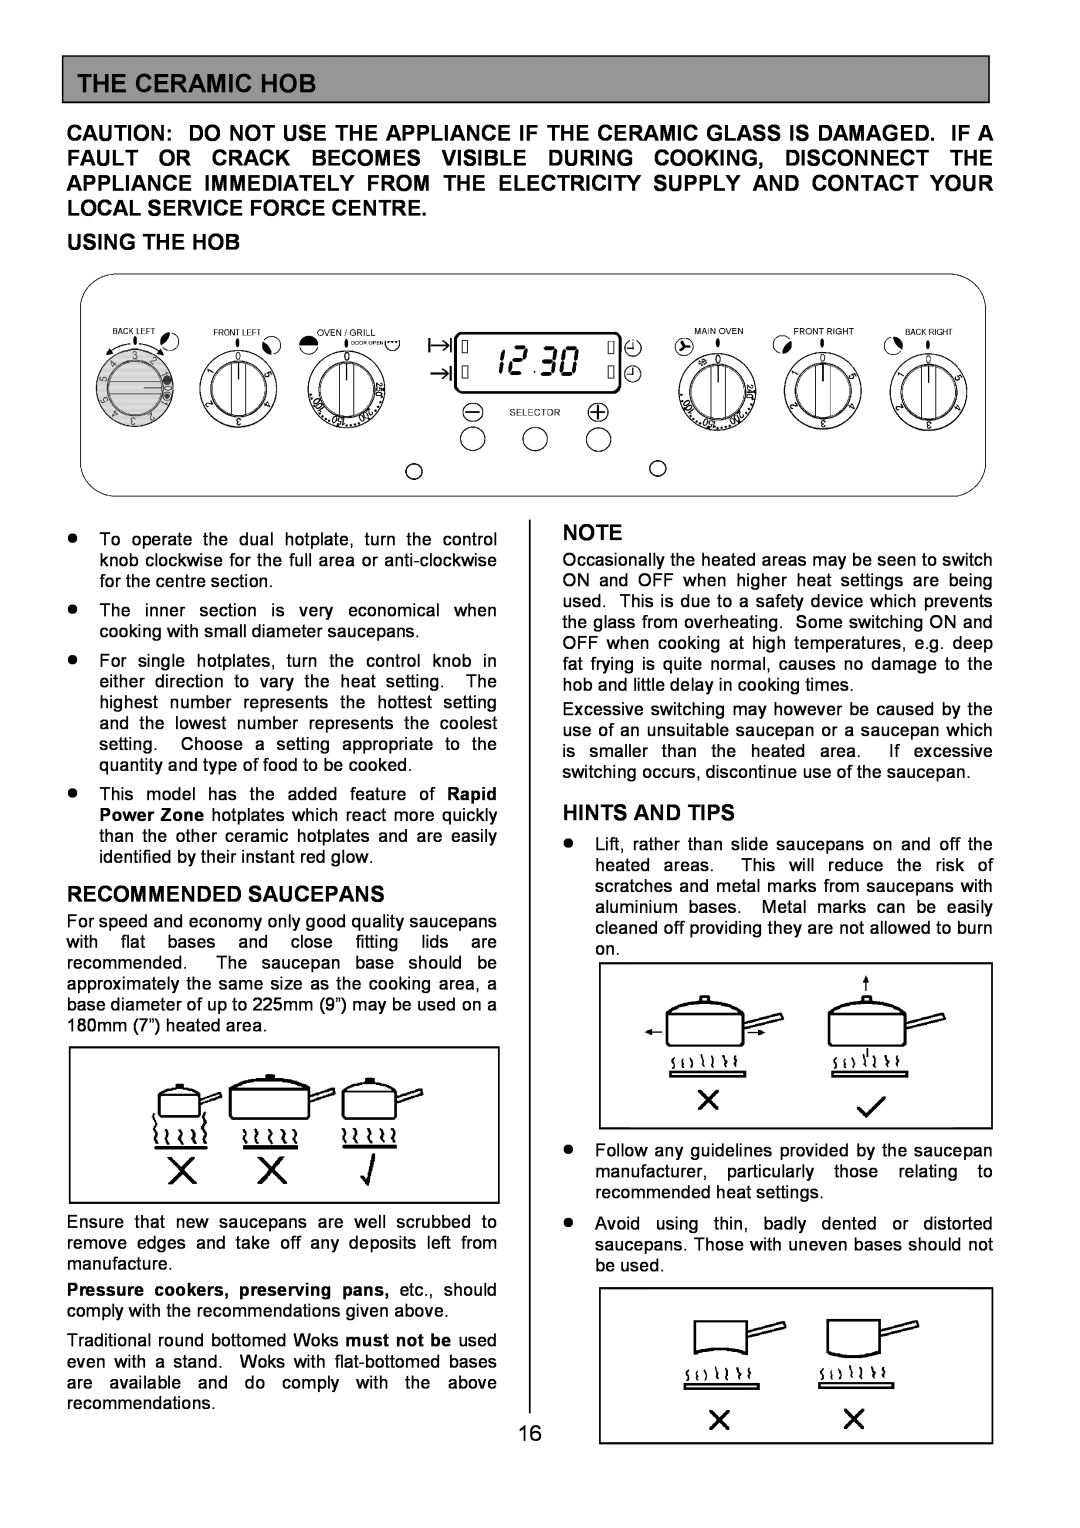 Tricity Bendix SIE556 installation instructions The Ceramic Hob, Using The Hob, Recommended Saucepans, Hints And Tips 